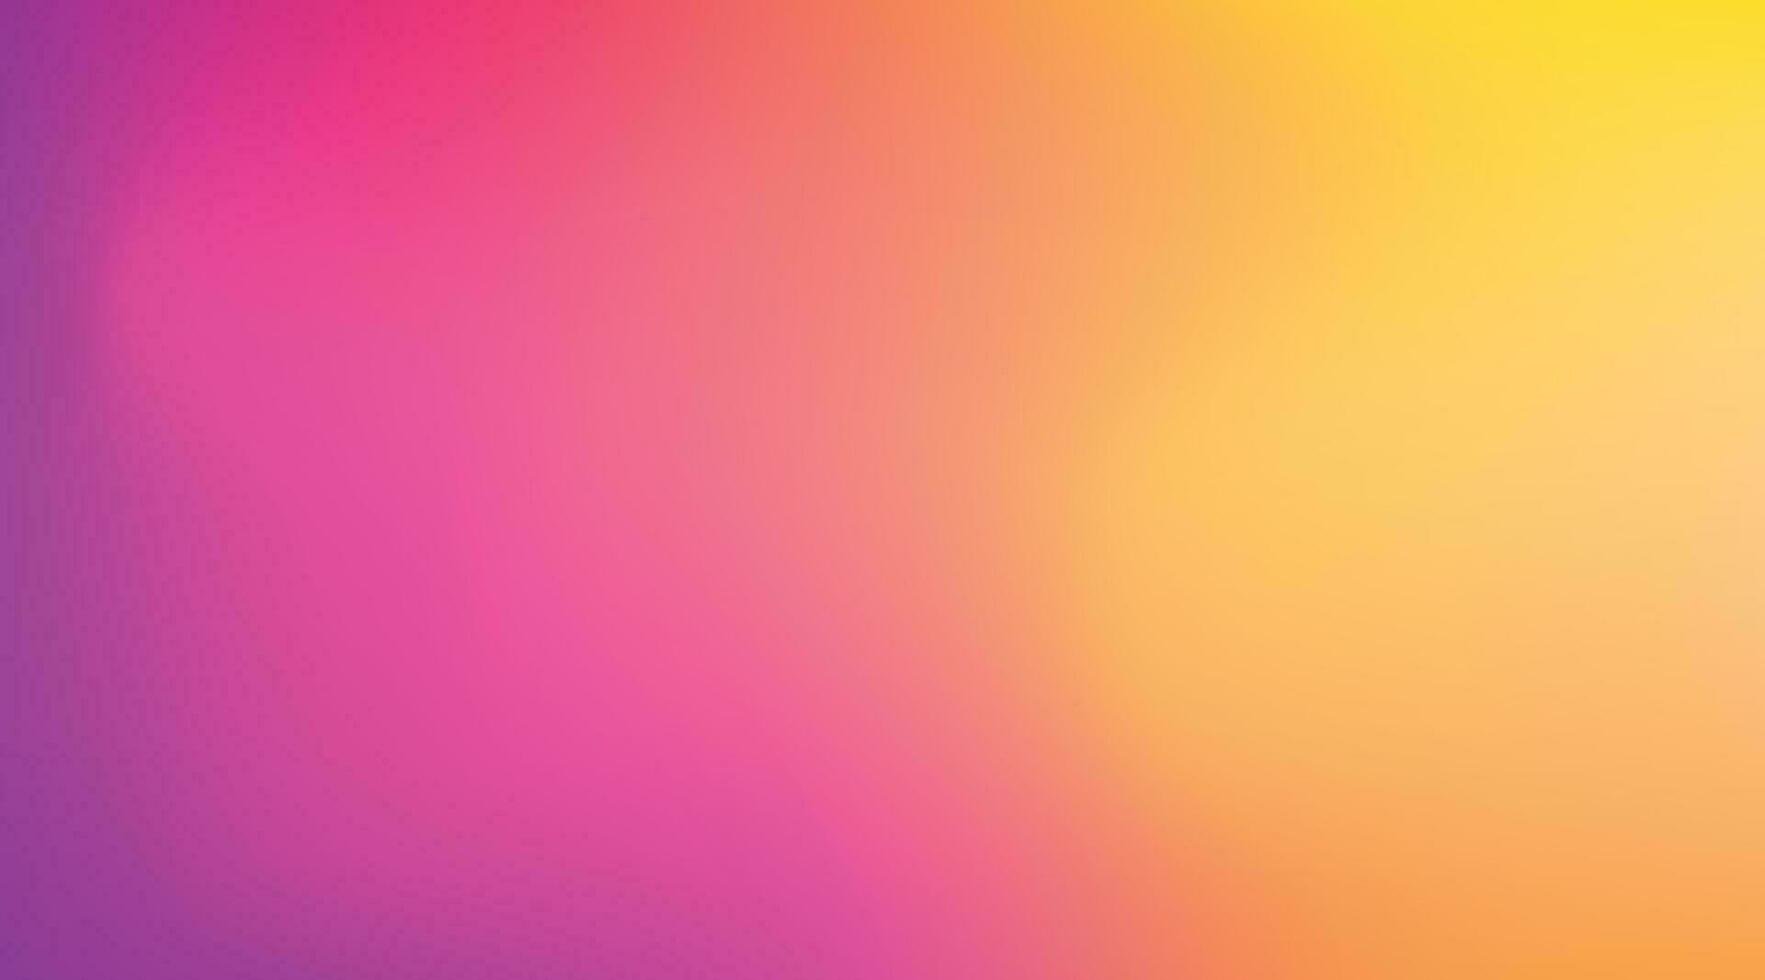 Abstract blurred gradient background. Magenta, pink, orange, yellow, purple, violet, red, vivid, sunrise color. Vector illustration graphic design, bright mesh texture for banner or poster. EPS 10